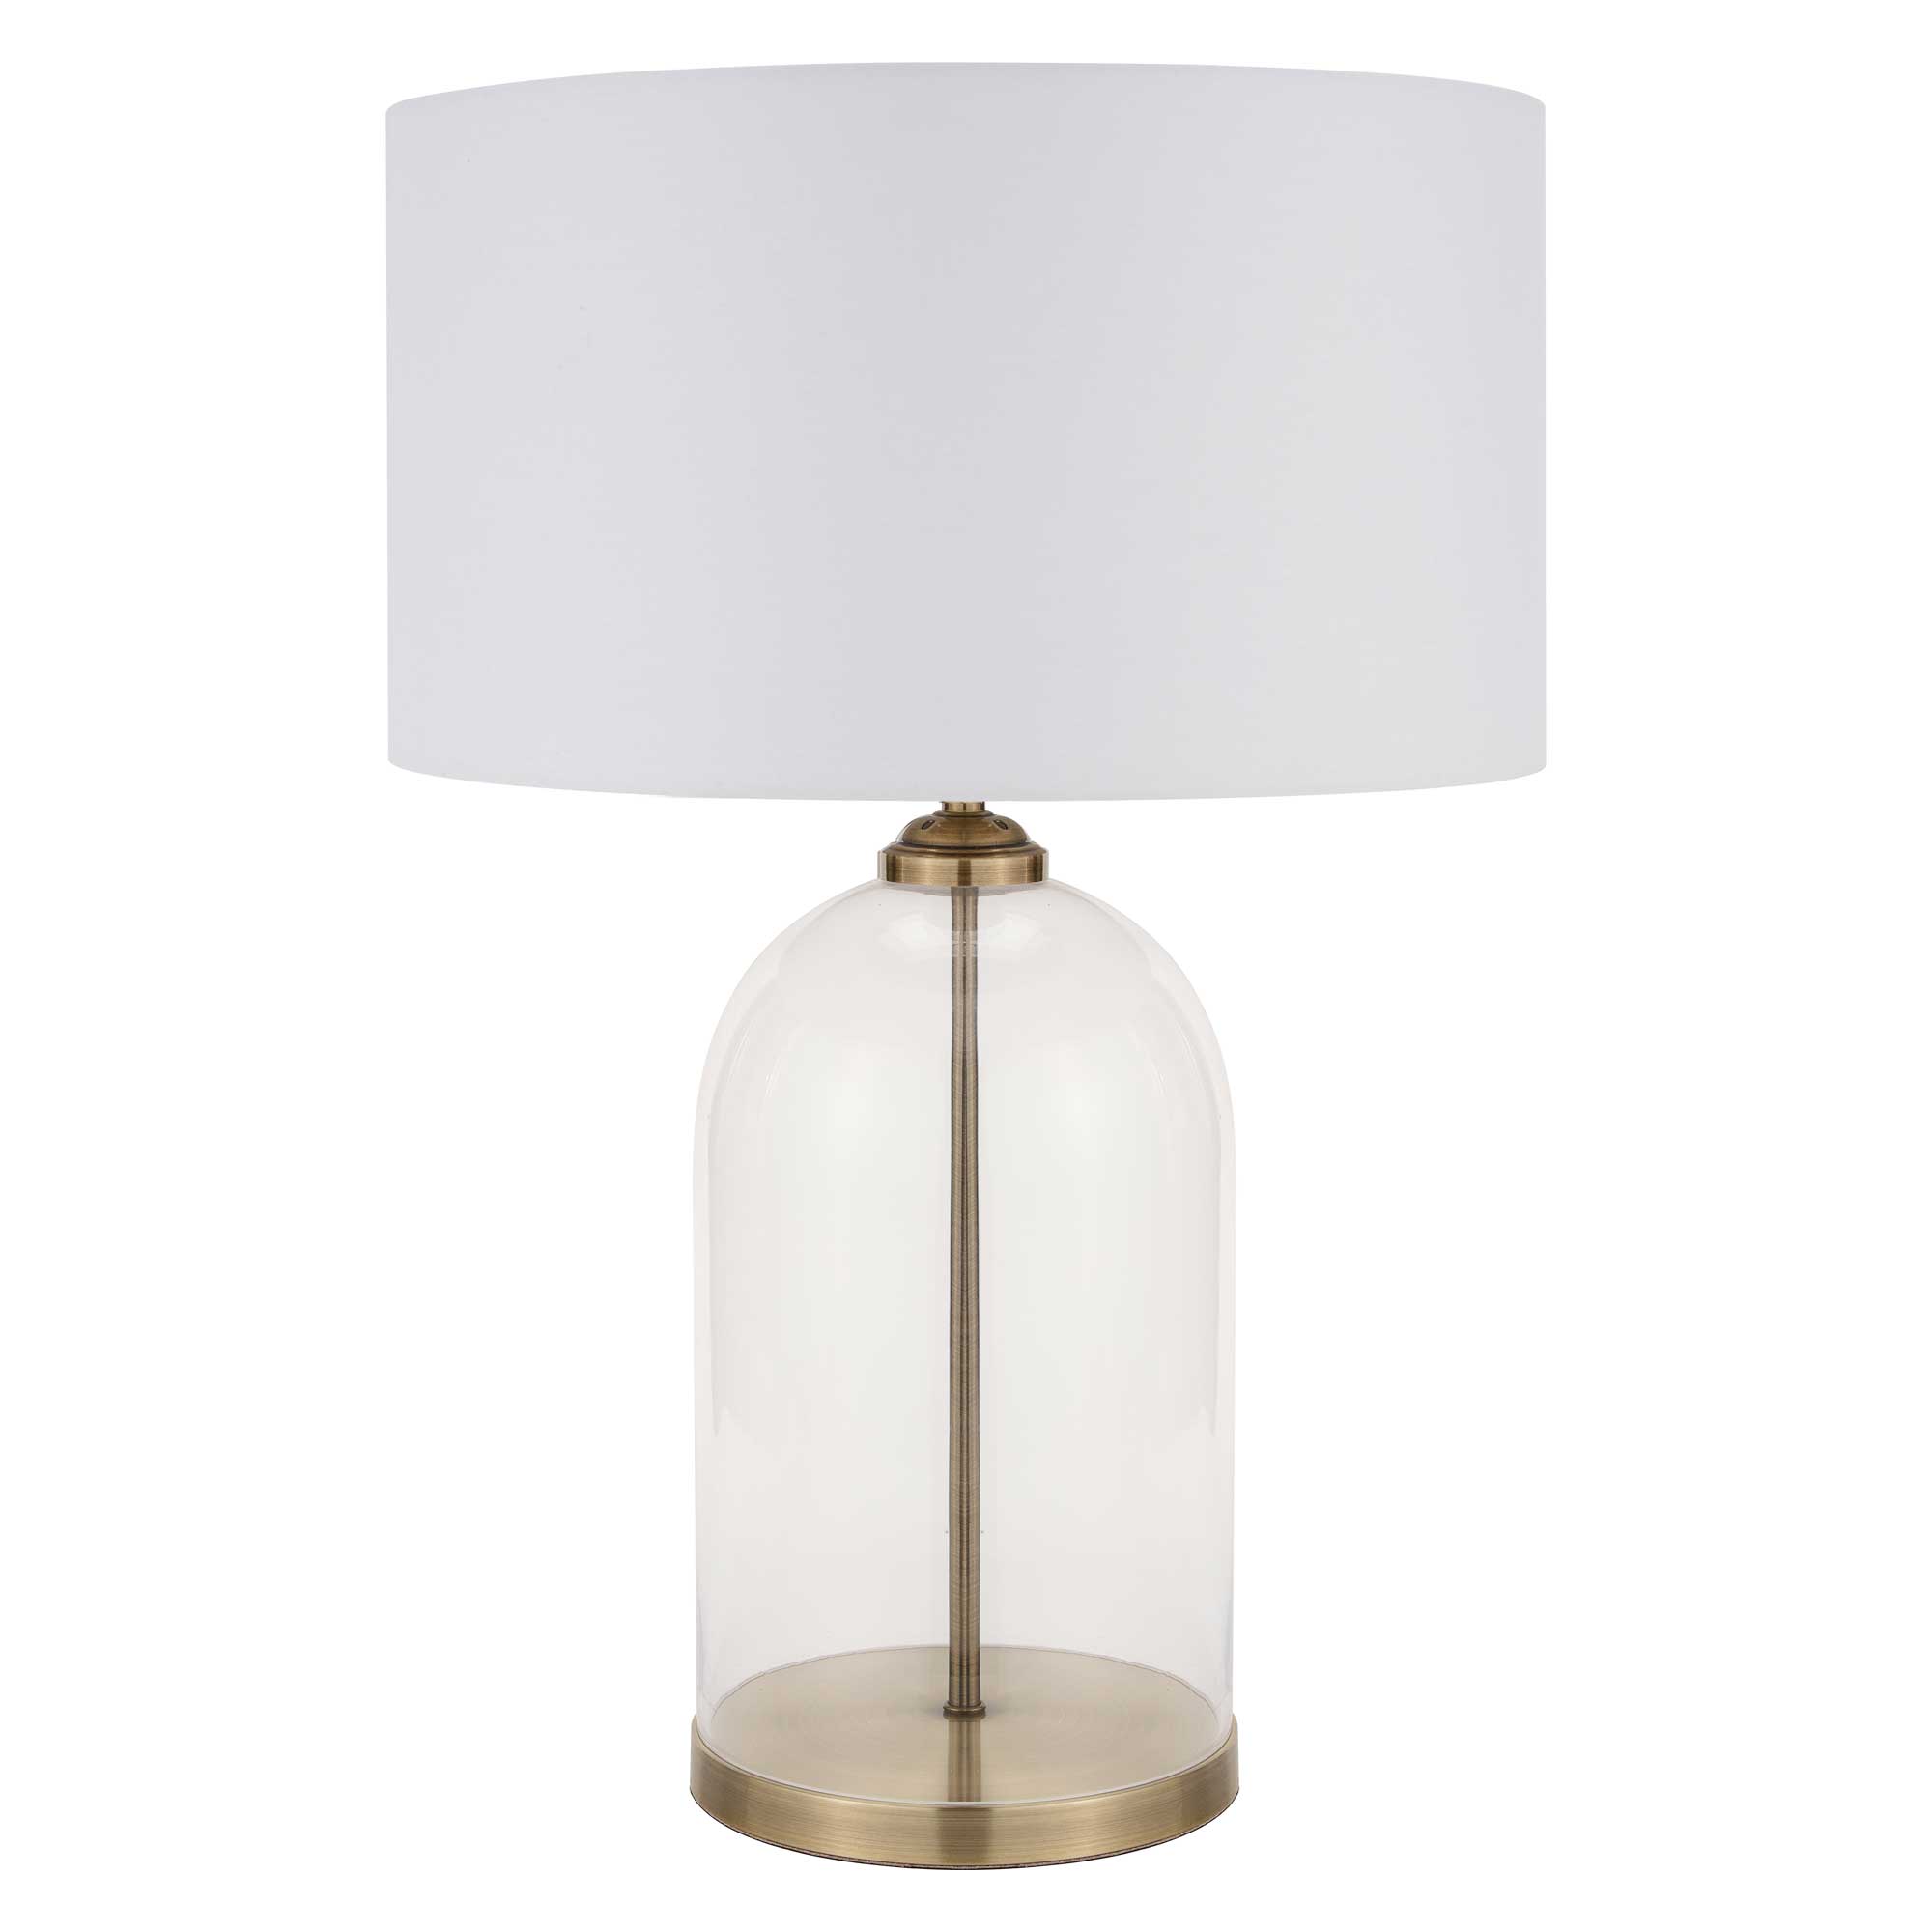 Cloche Glass Table Lamp, Gold | Barker & Stonehouse